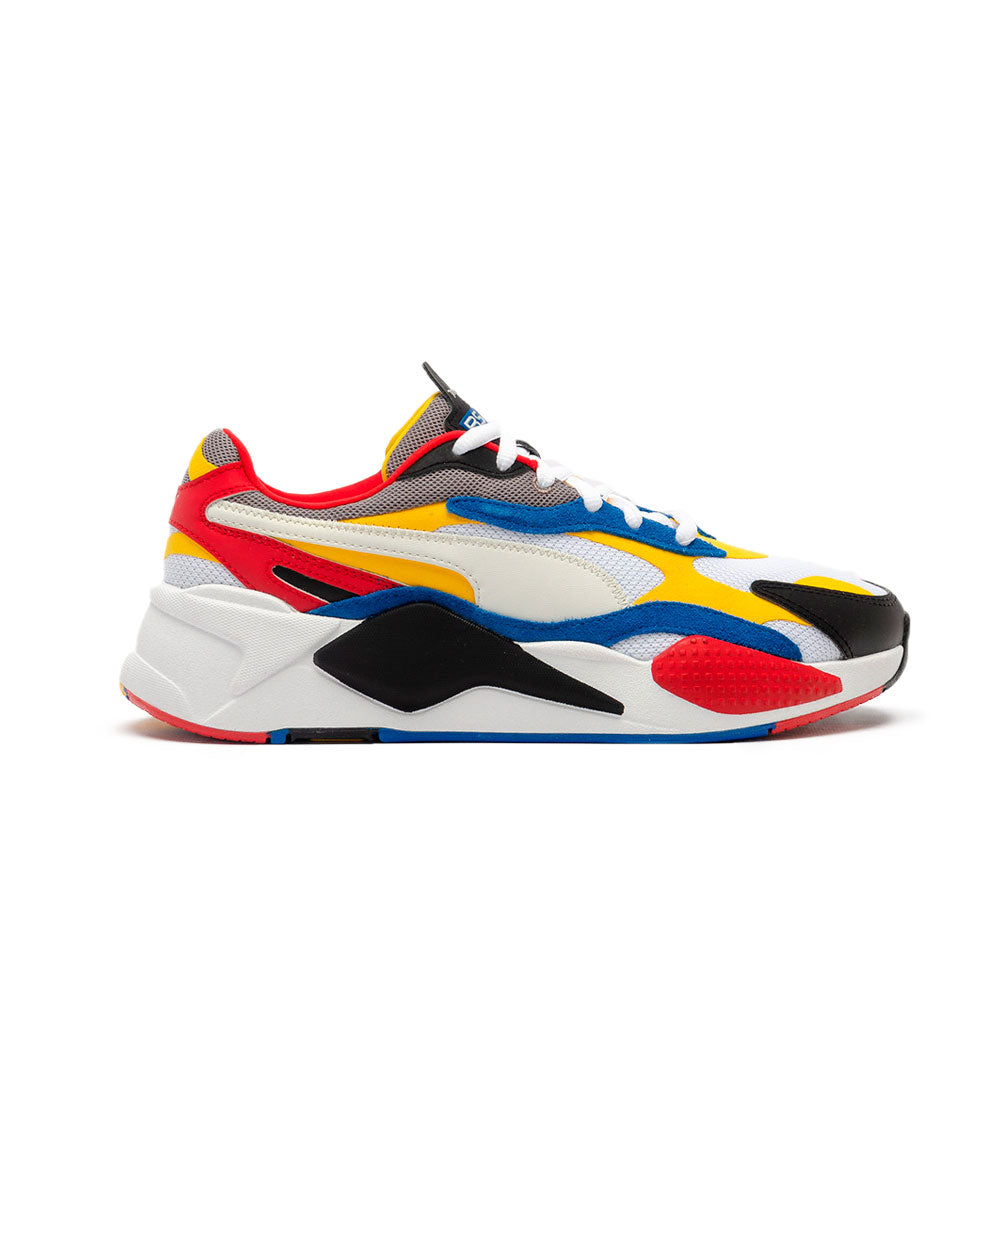 Puma RS X³ Puzzle Yellow